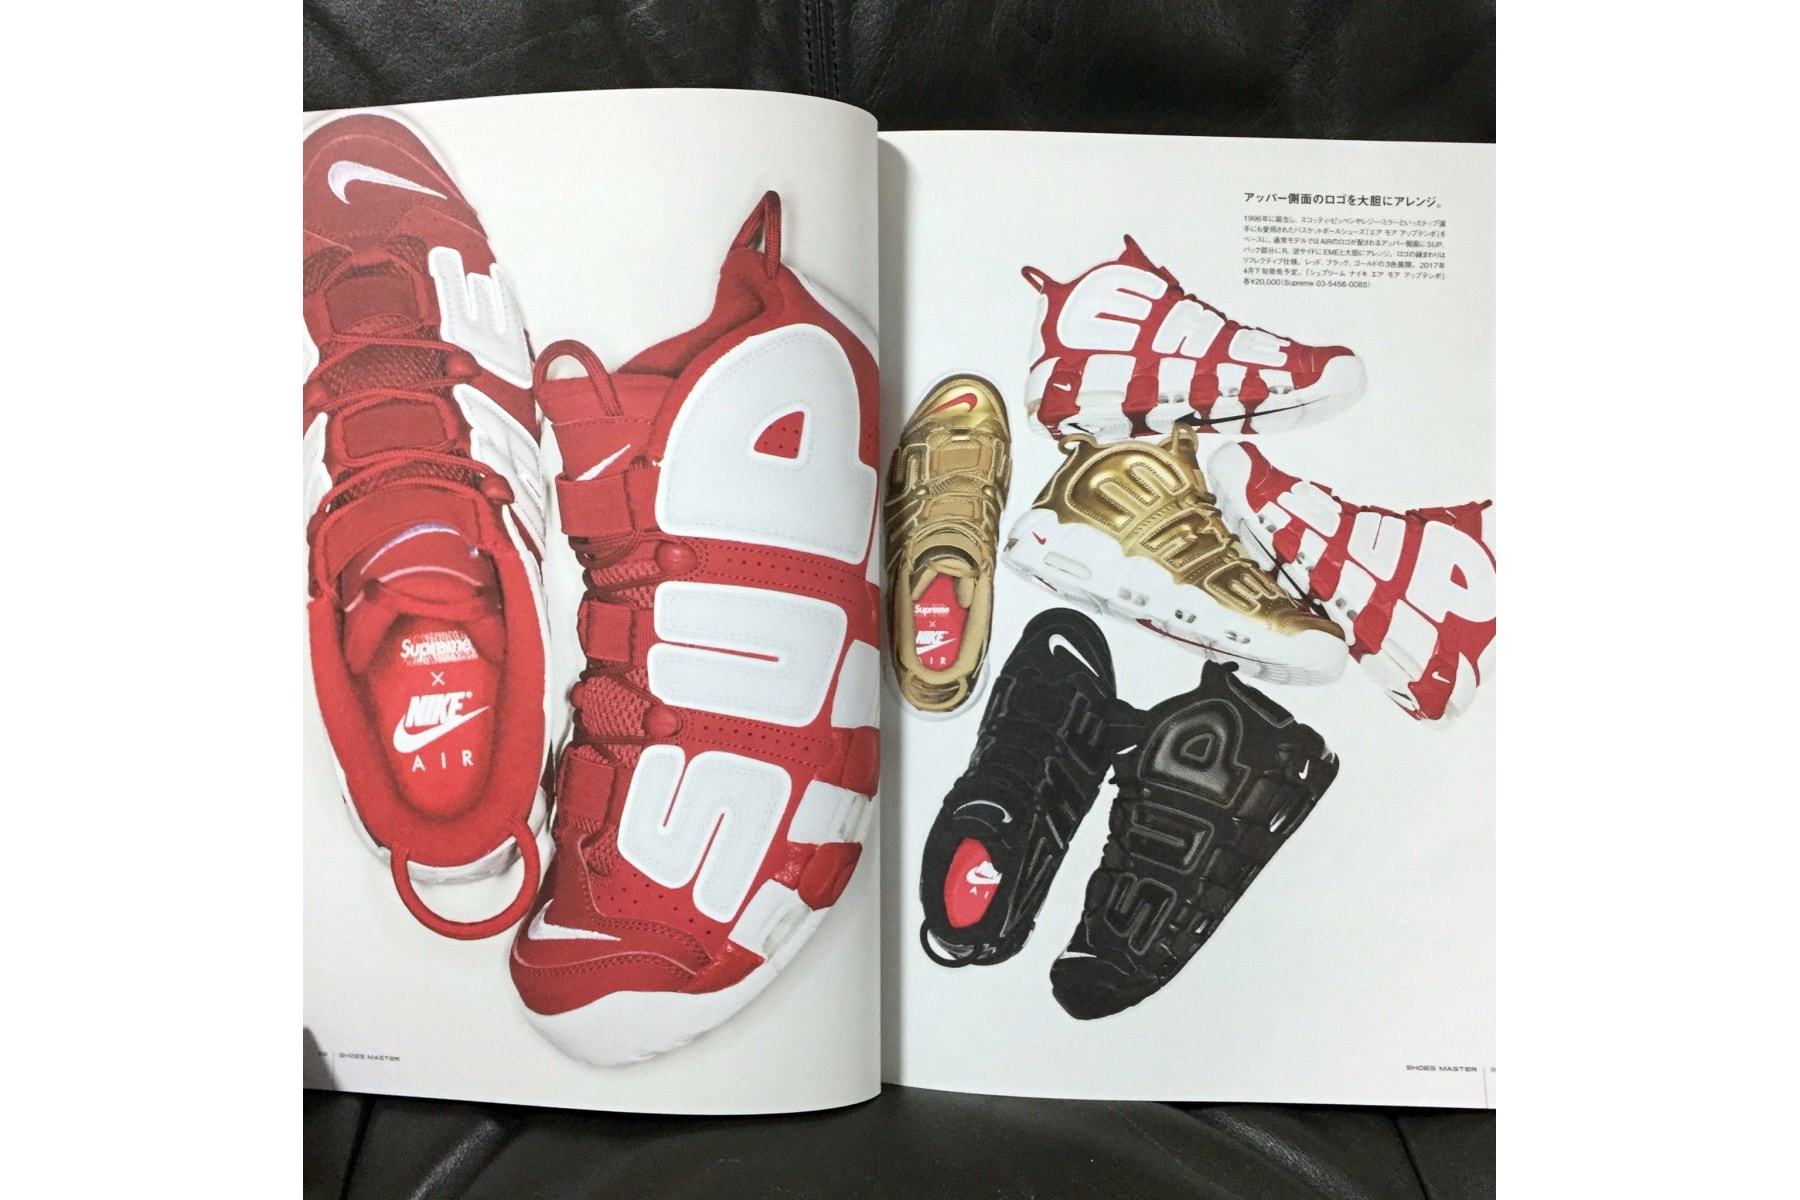 A Look at All the Supreme x Nike Air More Uptempo "Suptempo" Colorways